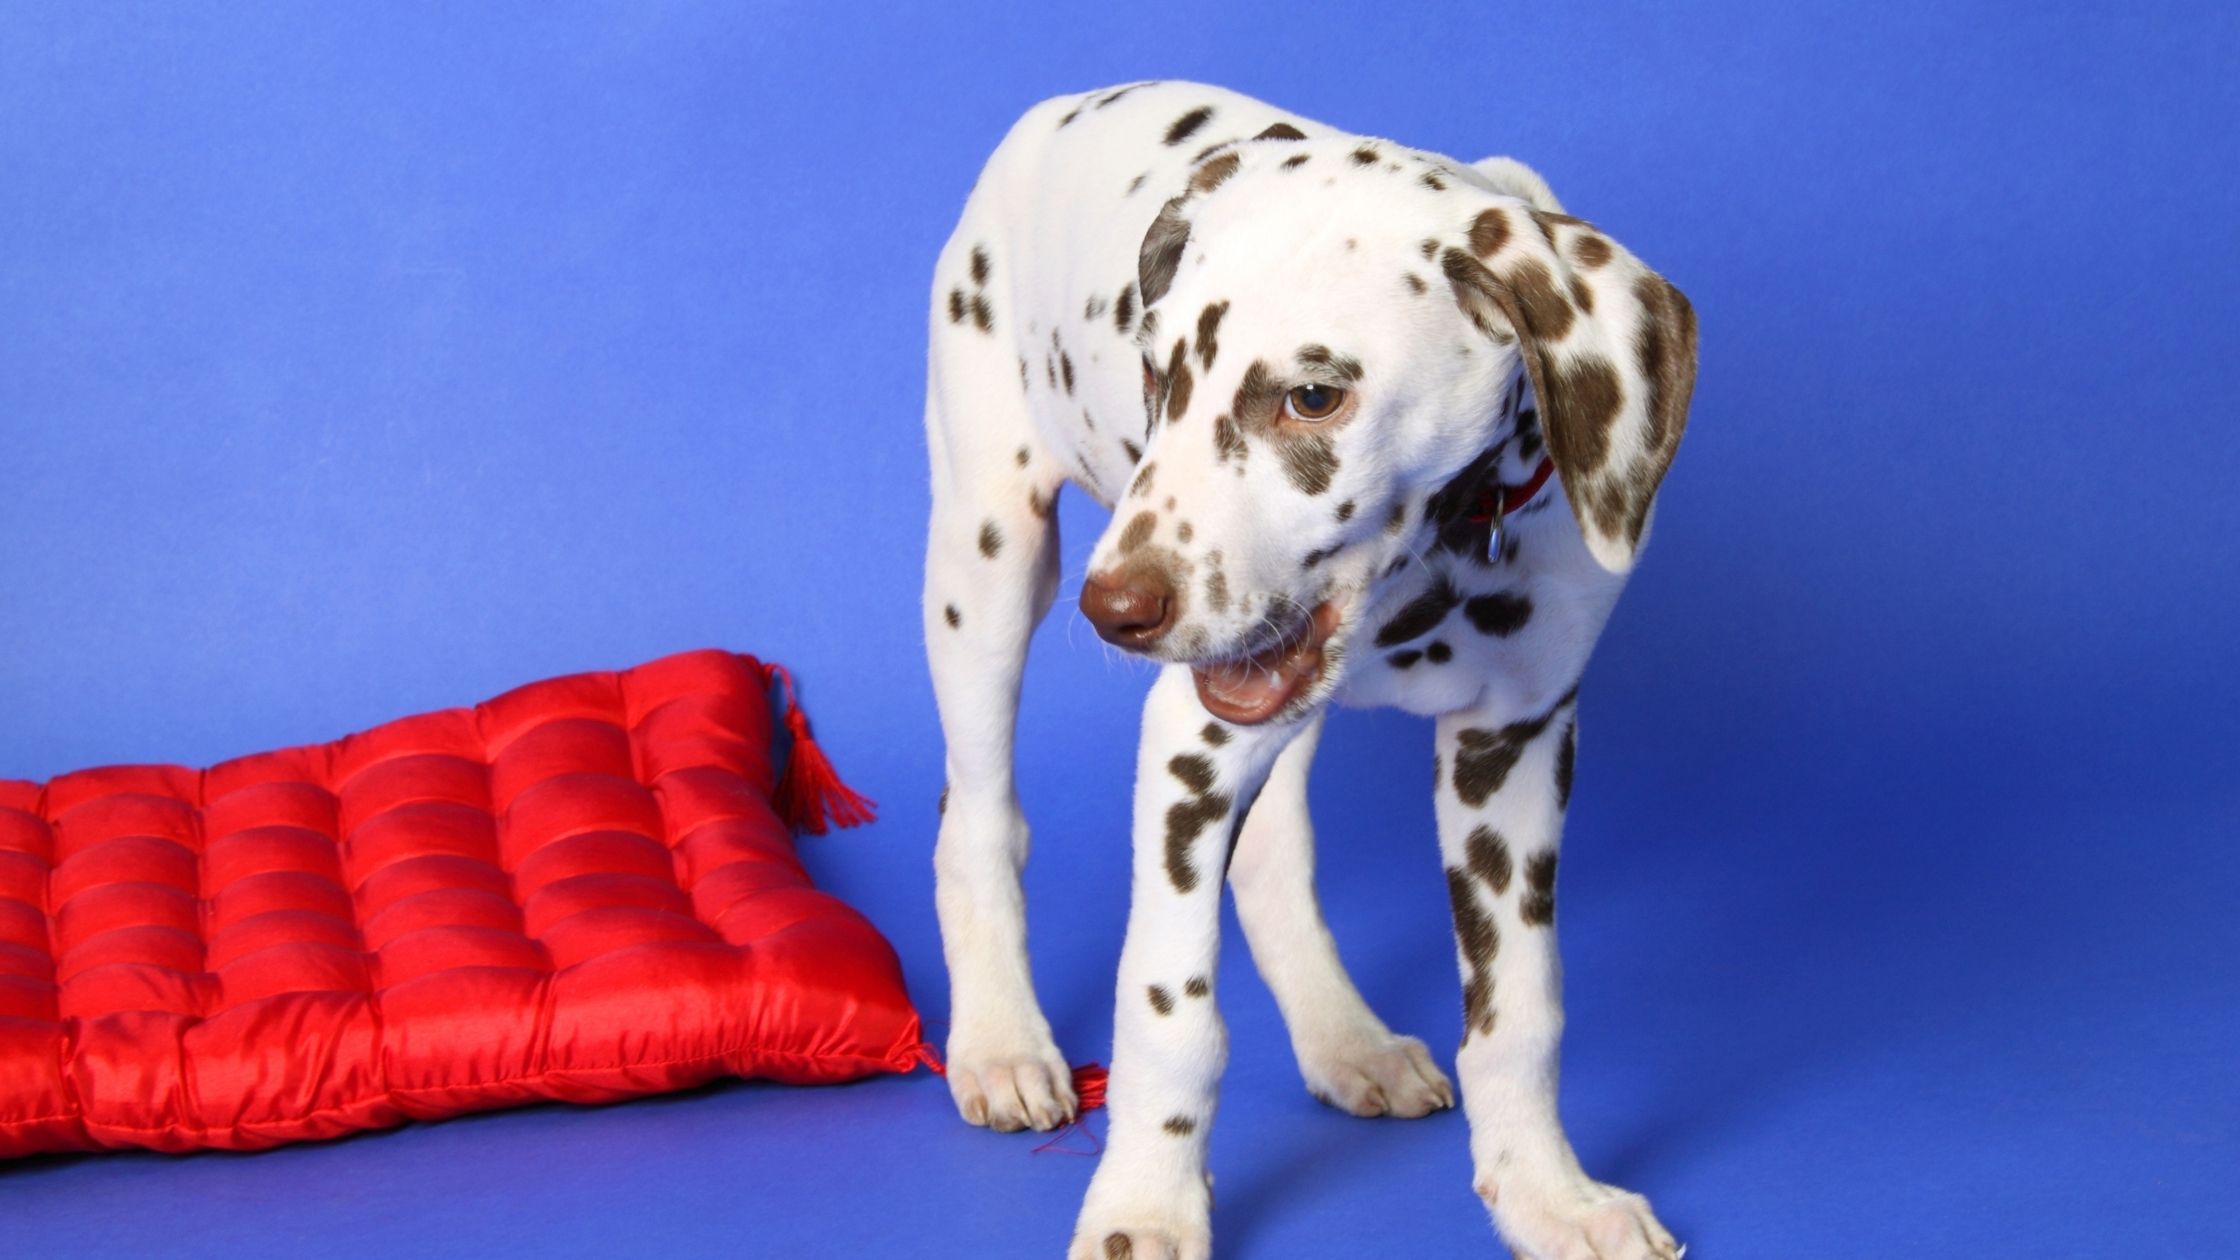 A brown long haired Dalmatian